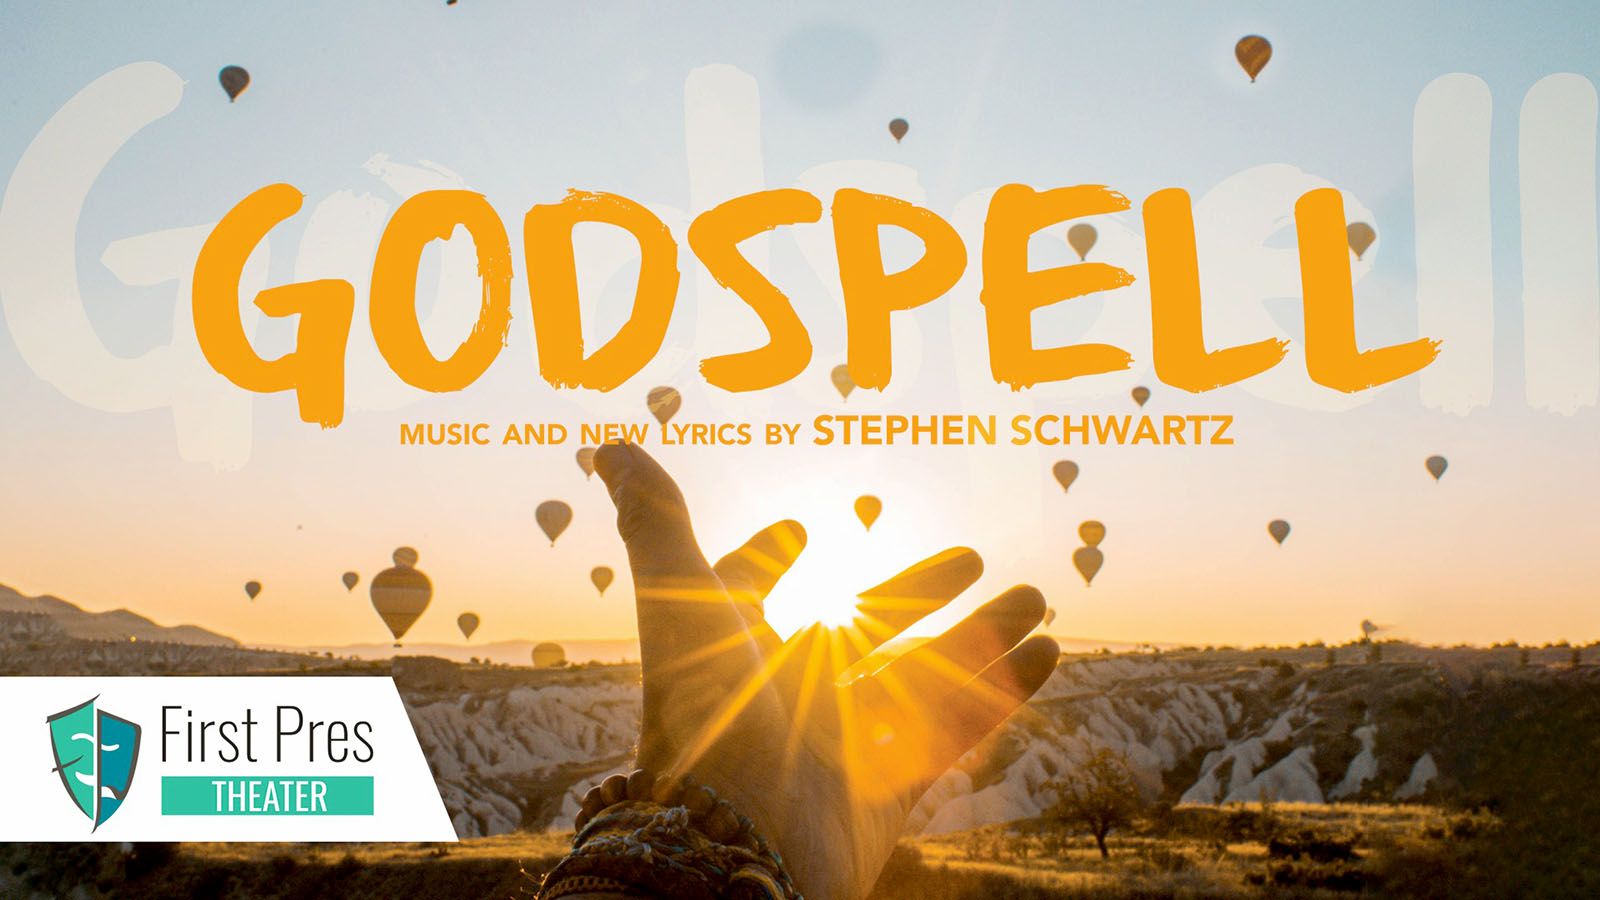 First Pres' Godspell opens March 24 and closes April 2.